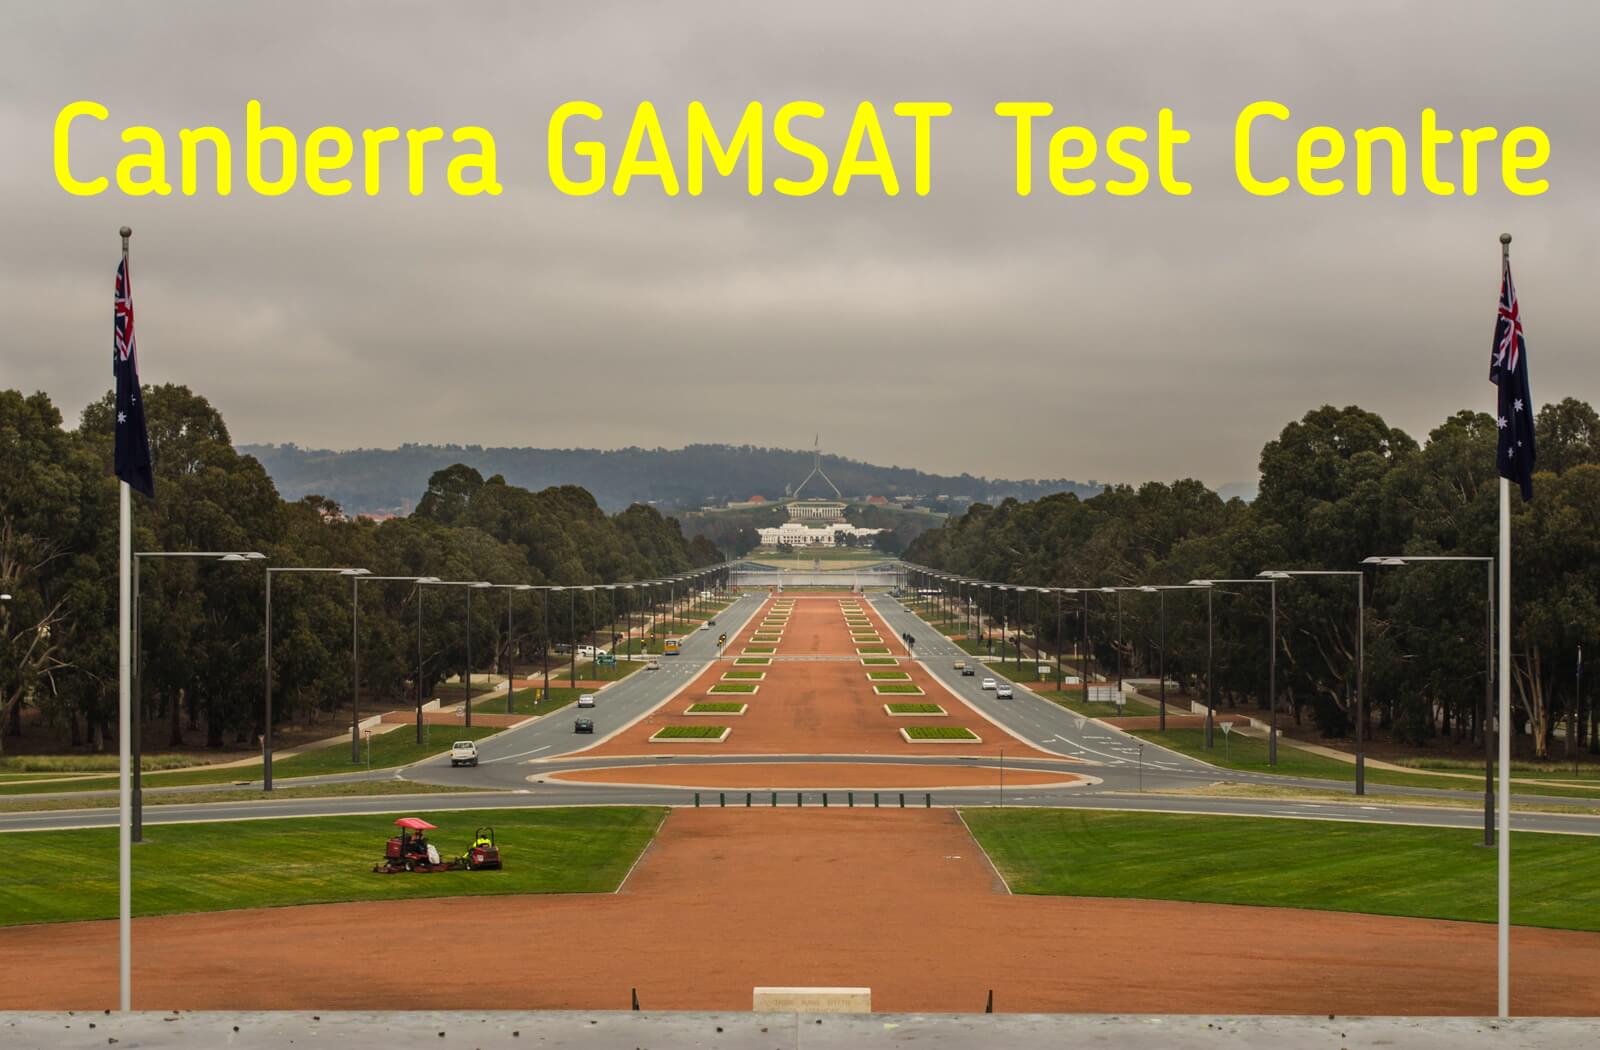 Where is GAMSAT held in Canberra?